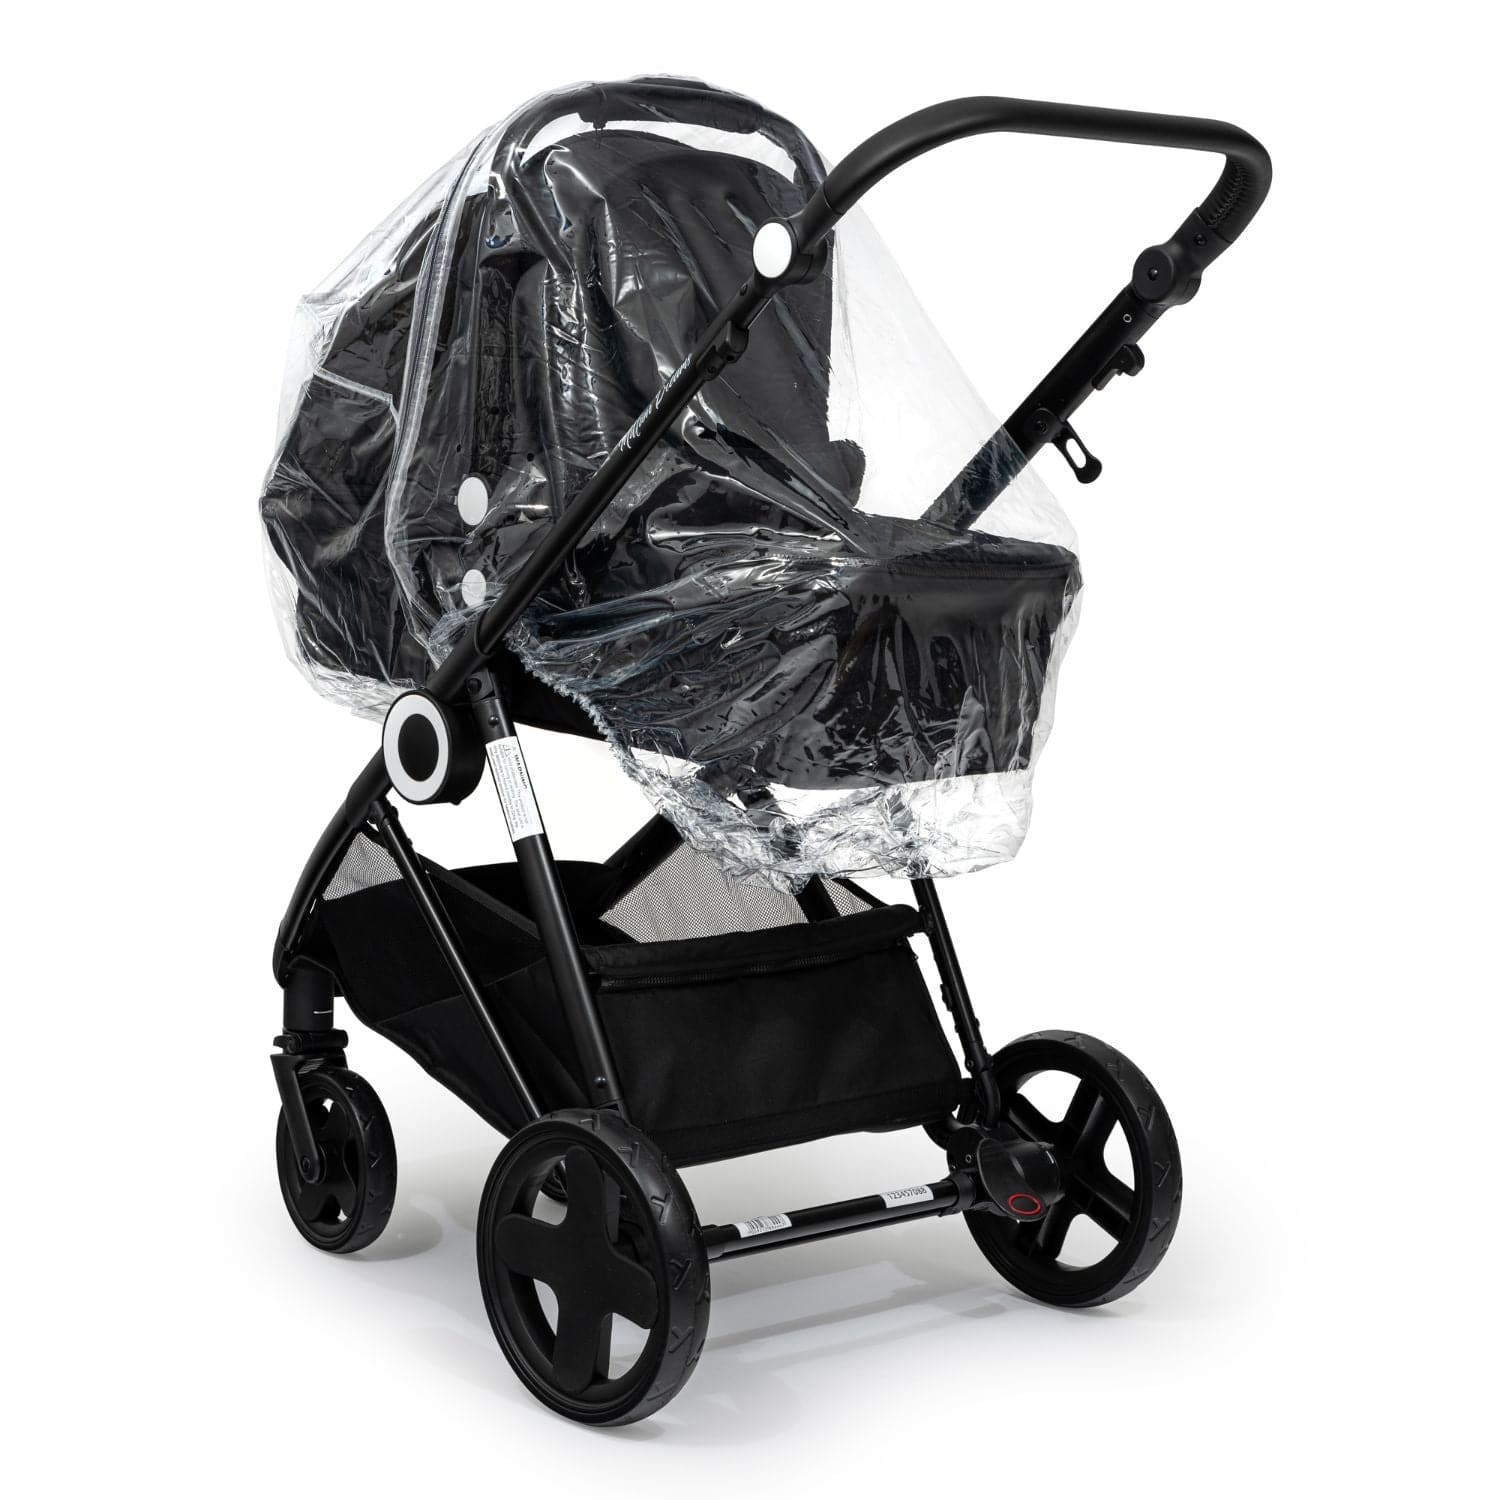 Carrycot Raincover Compatible With BabySun - Fits All Models - For Your Little One